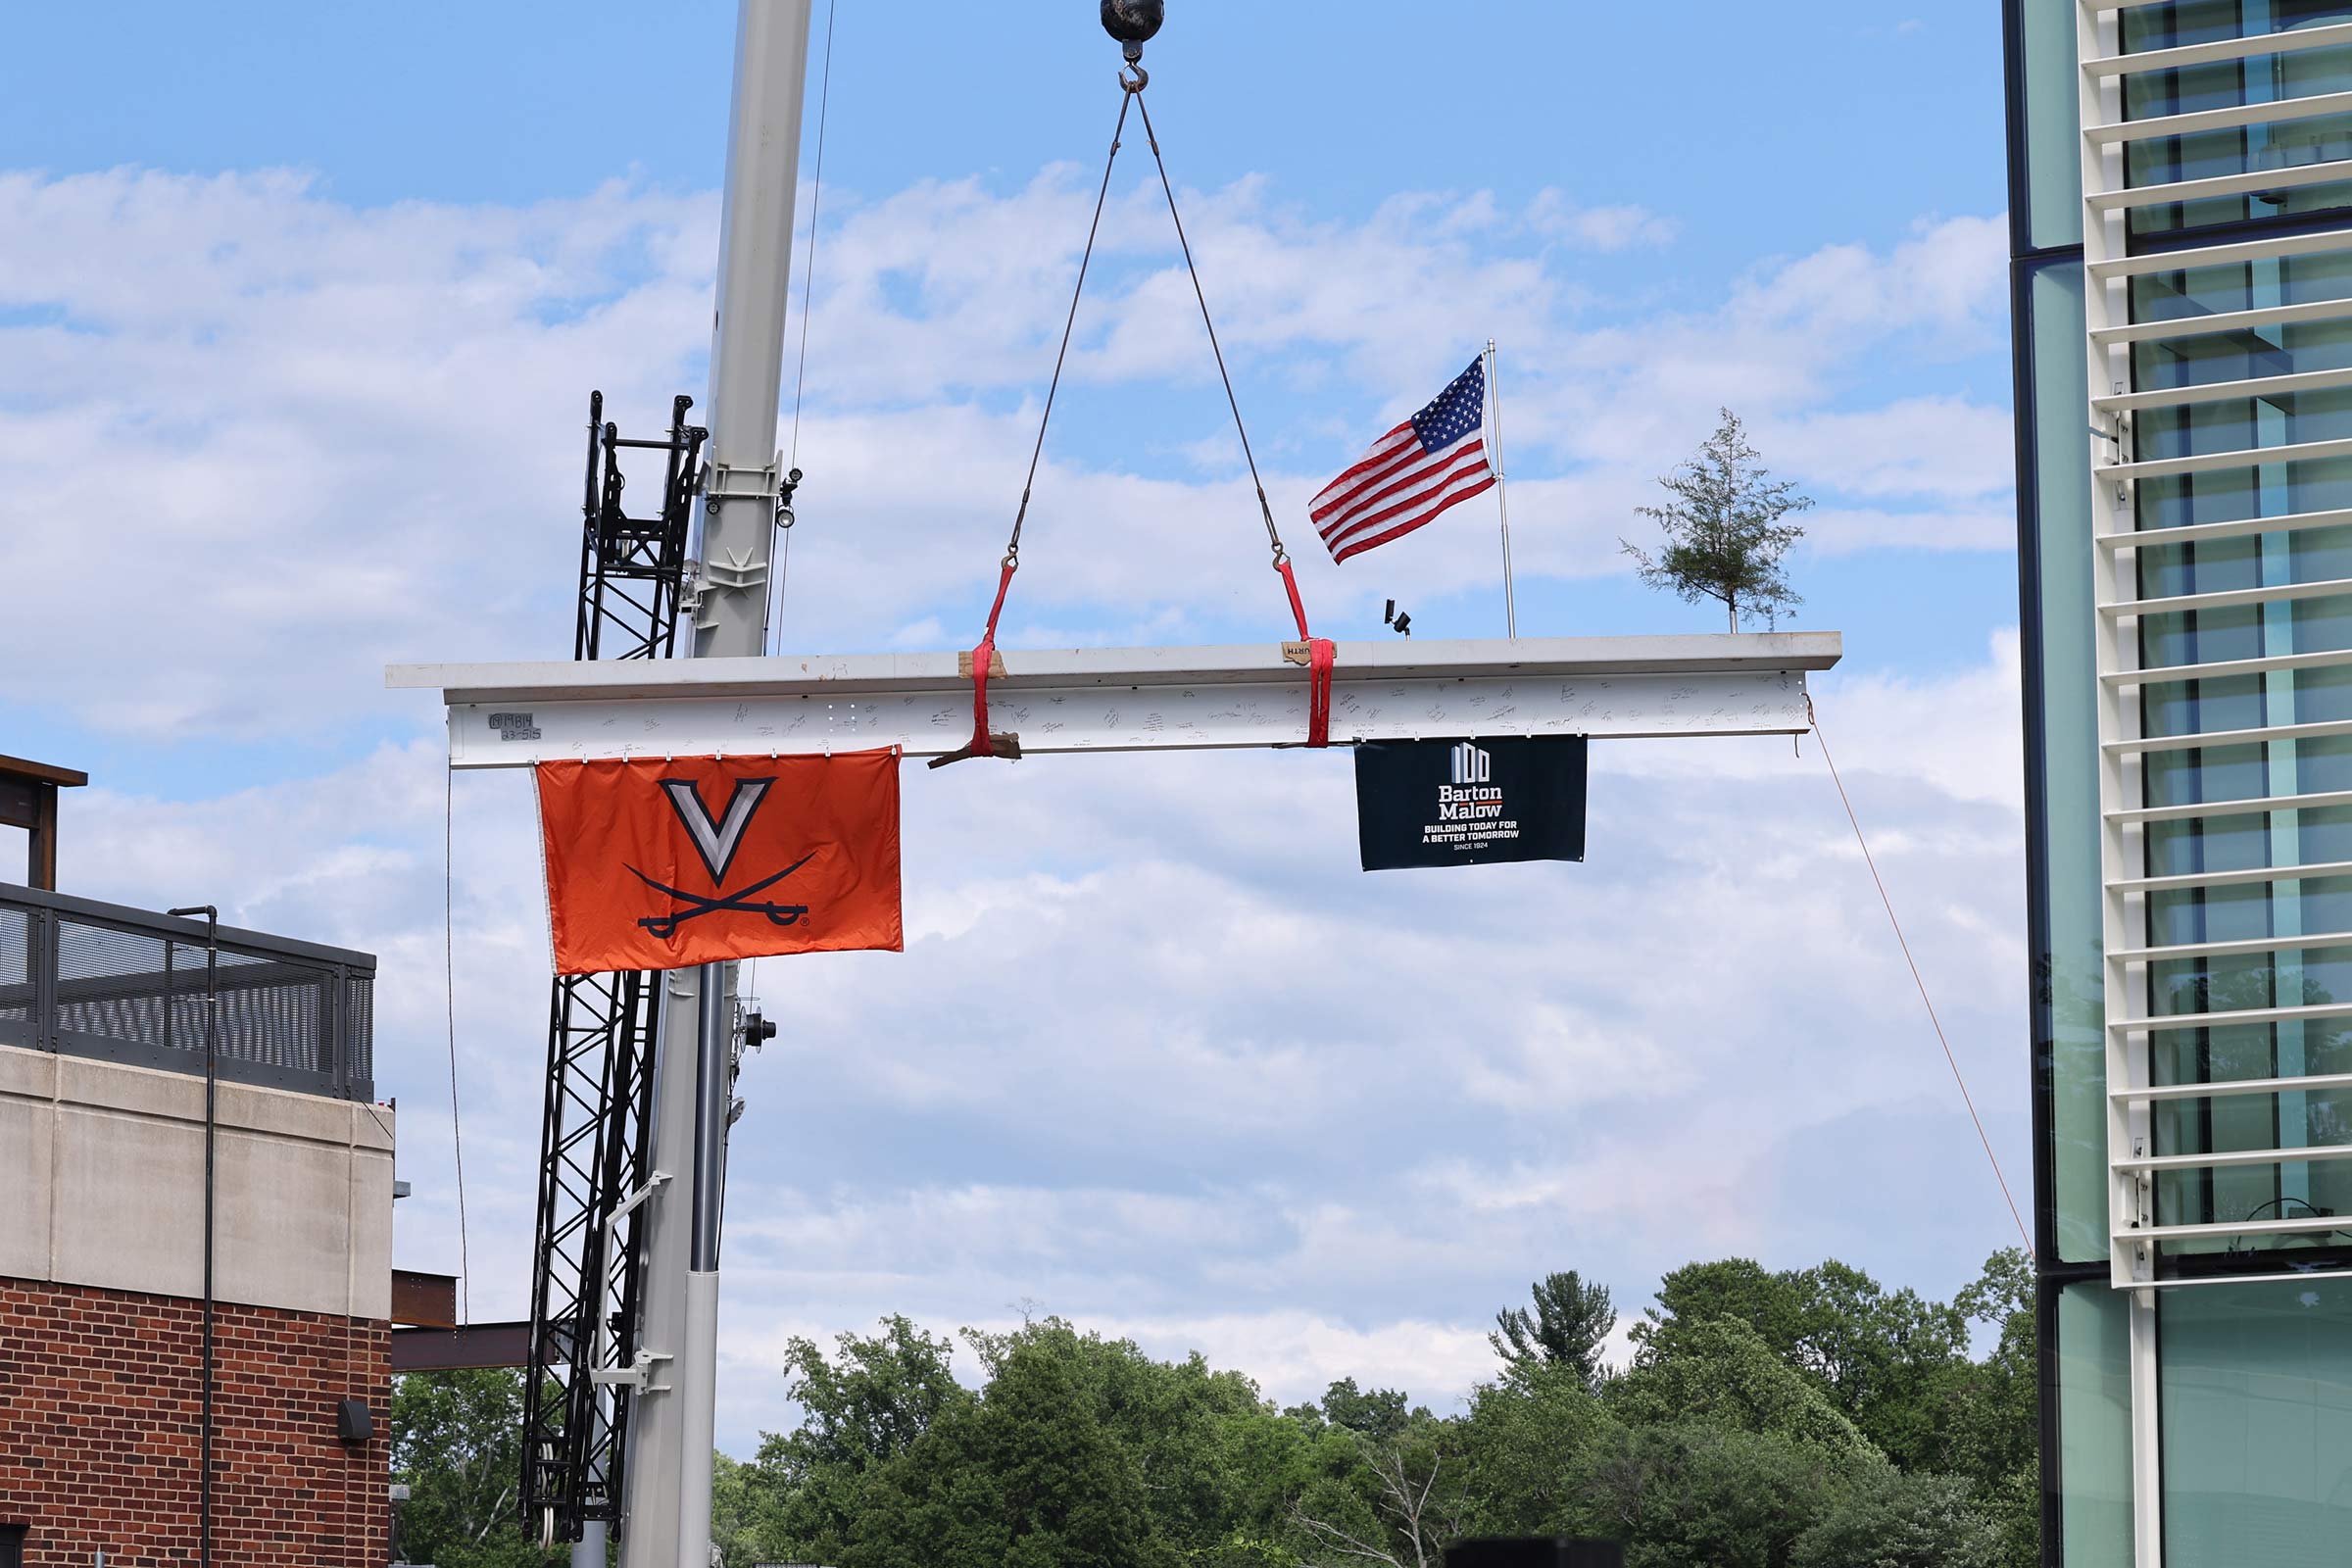 The final steel beam is placed atop the Harrison Family Olympic Sports Center, which is scheduled to open next summer. The building, which will accommodate UVA’s Olympic sports programs, is named for the family of the late Mary and David Harrison III, two of the University’s most generous benefactors.